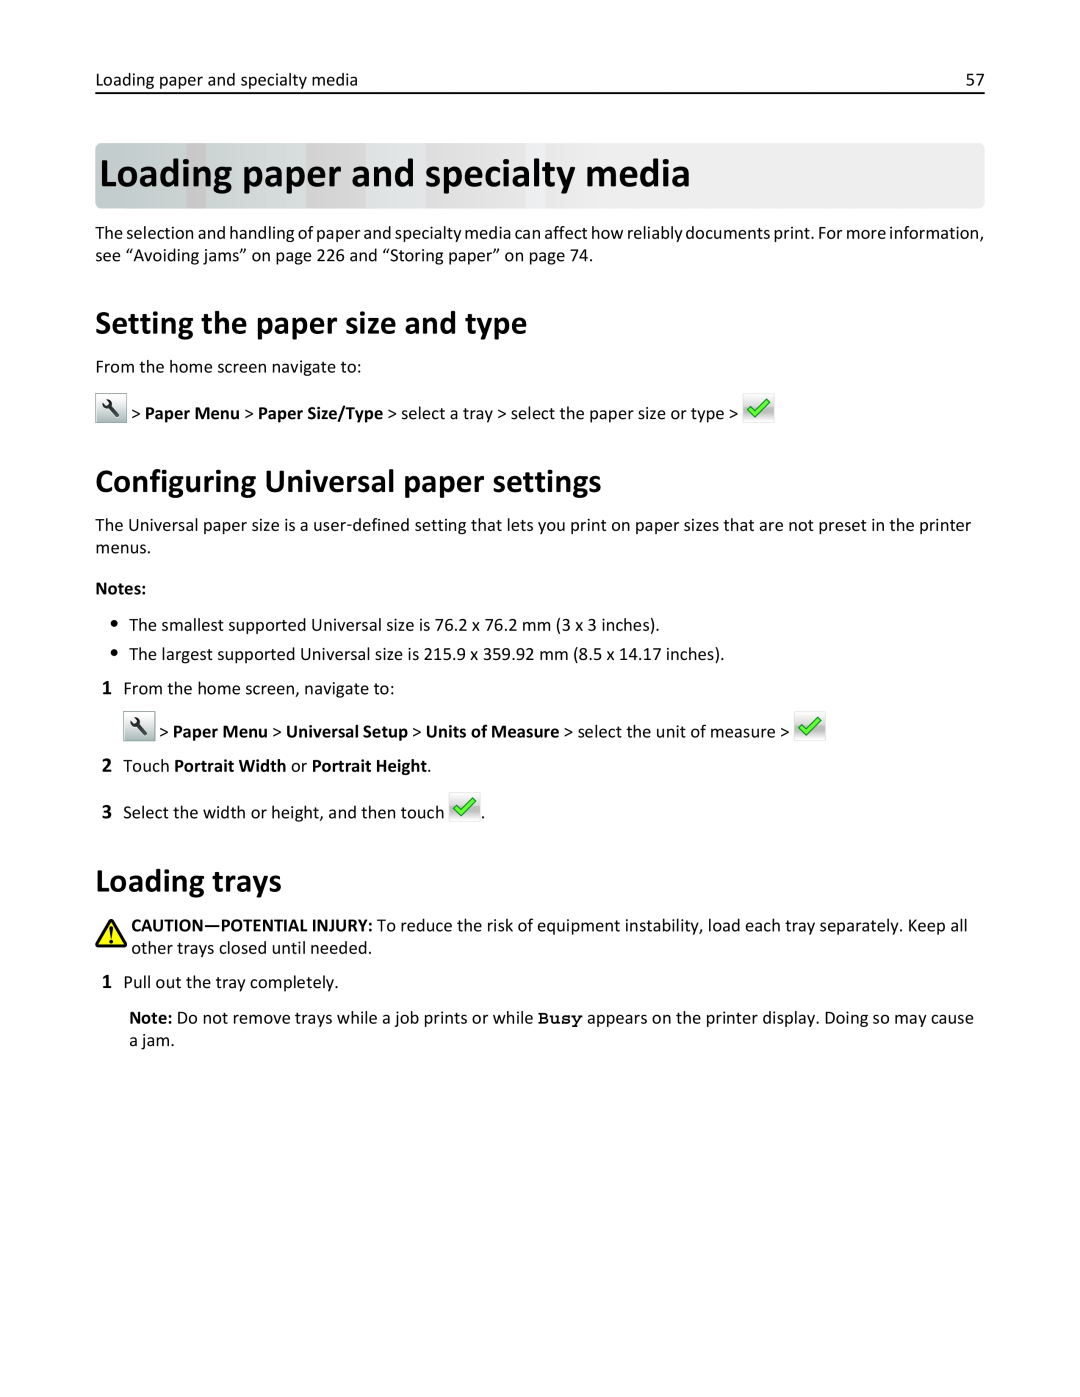 Lexmark 35S5701 Loadingpaperand specialty media, Setting the paper size and type, Configuring Universal paper settings 